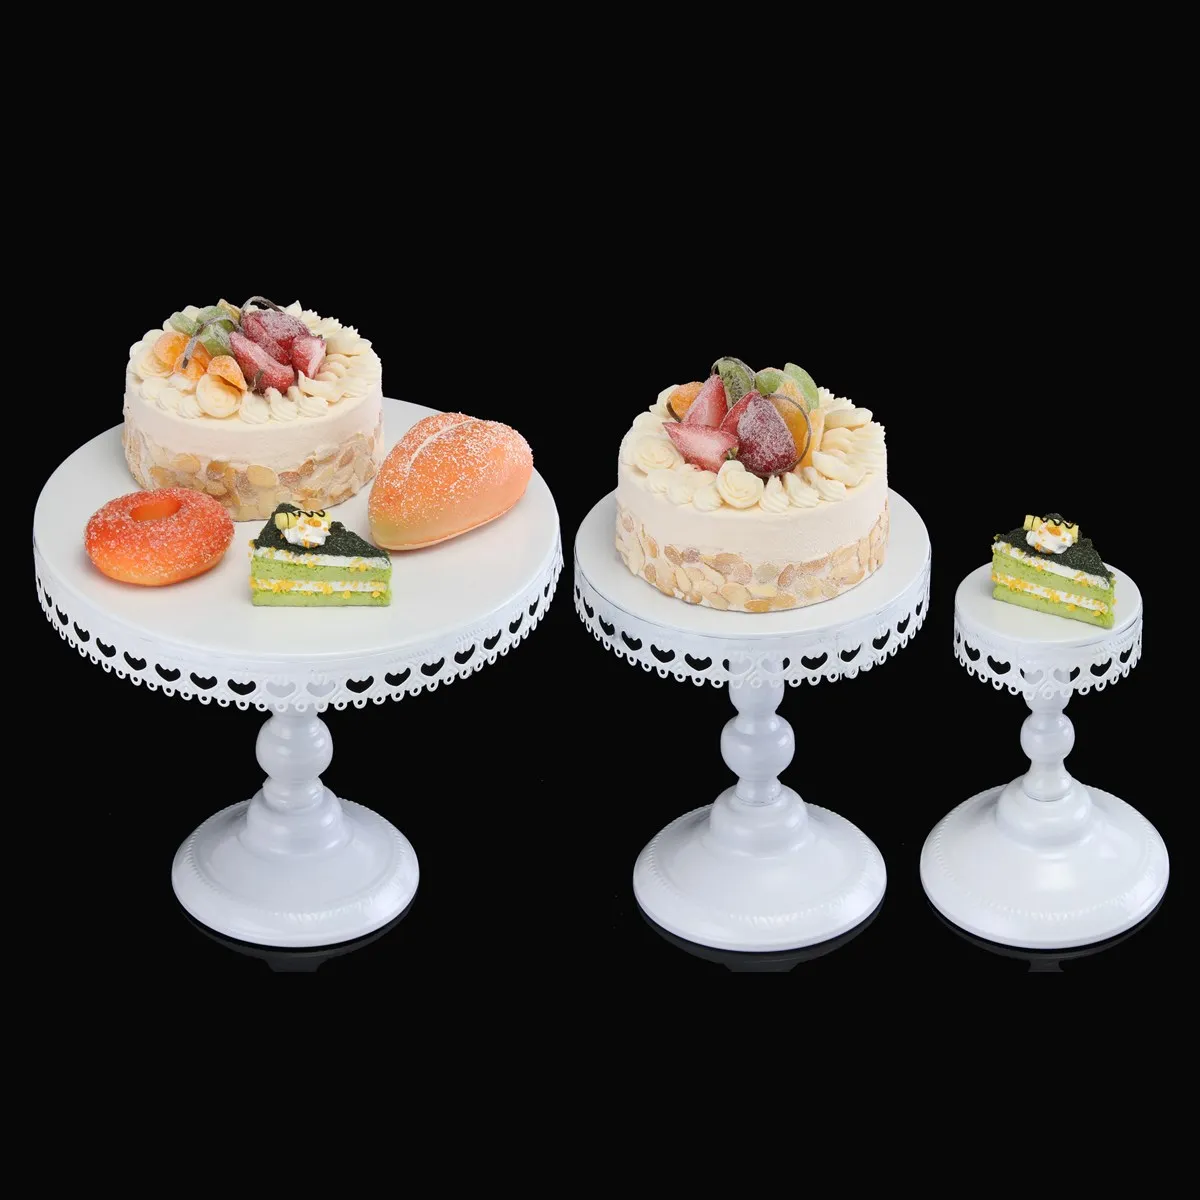 Image Iron Cupcake Dessert Cake Stand White Platter Stand Display Rack Birthday Party Events Catering Serving Tools Wedding Decoration